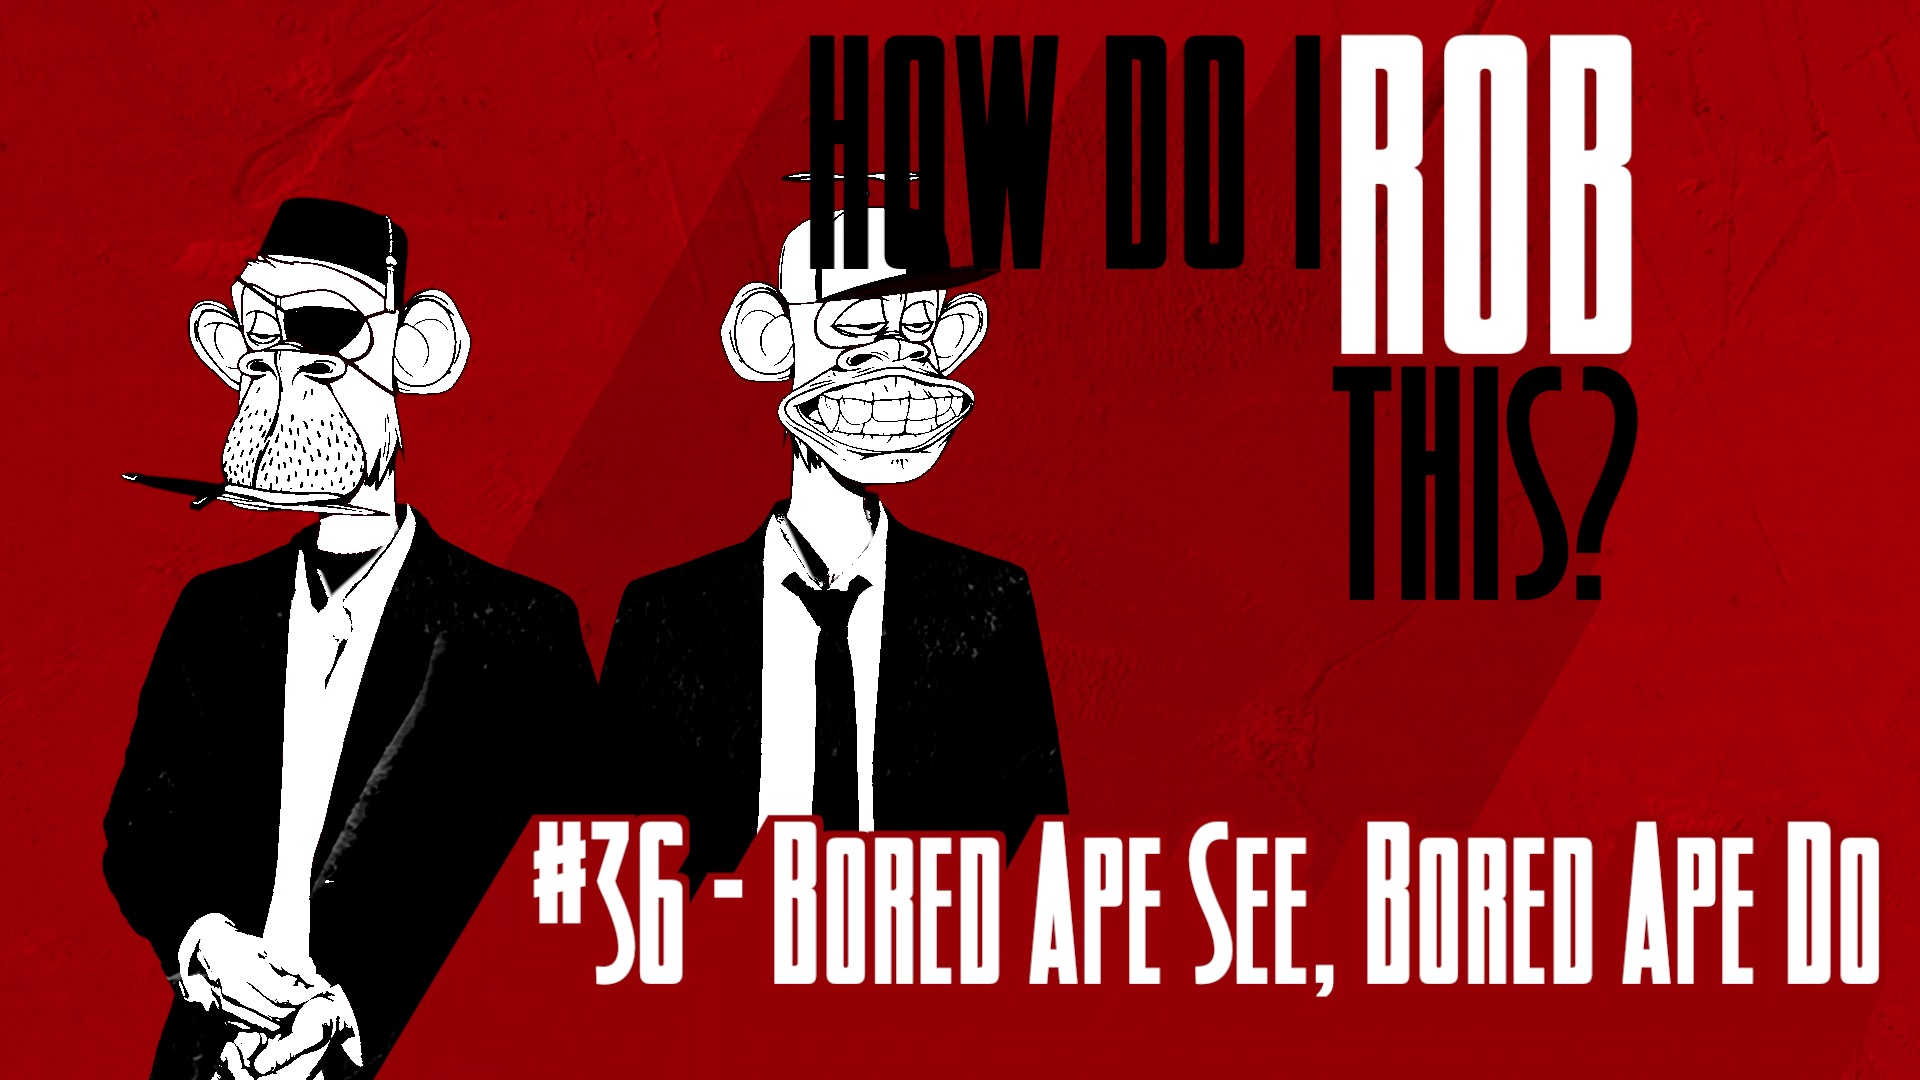 __How Do I Rob This_36 - Bored Ape See